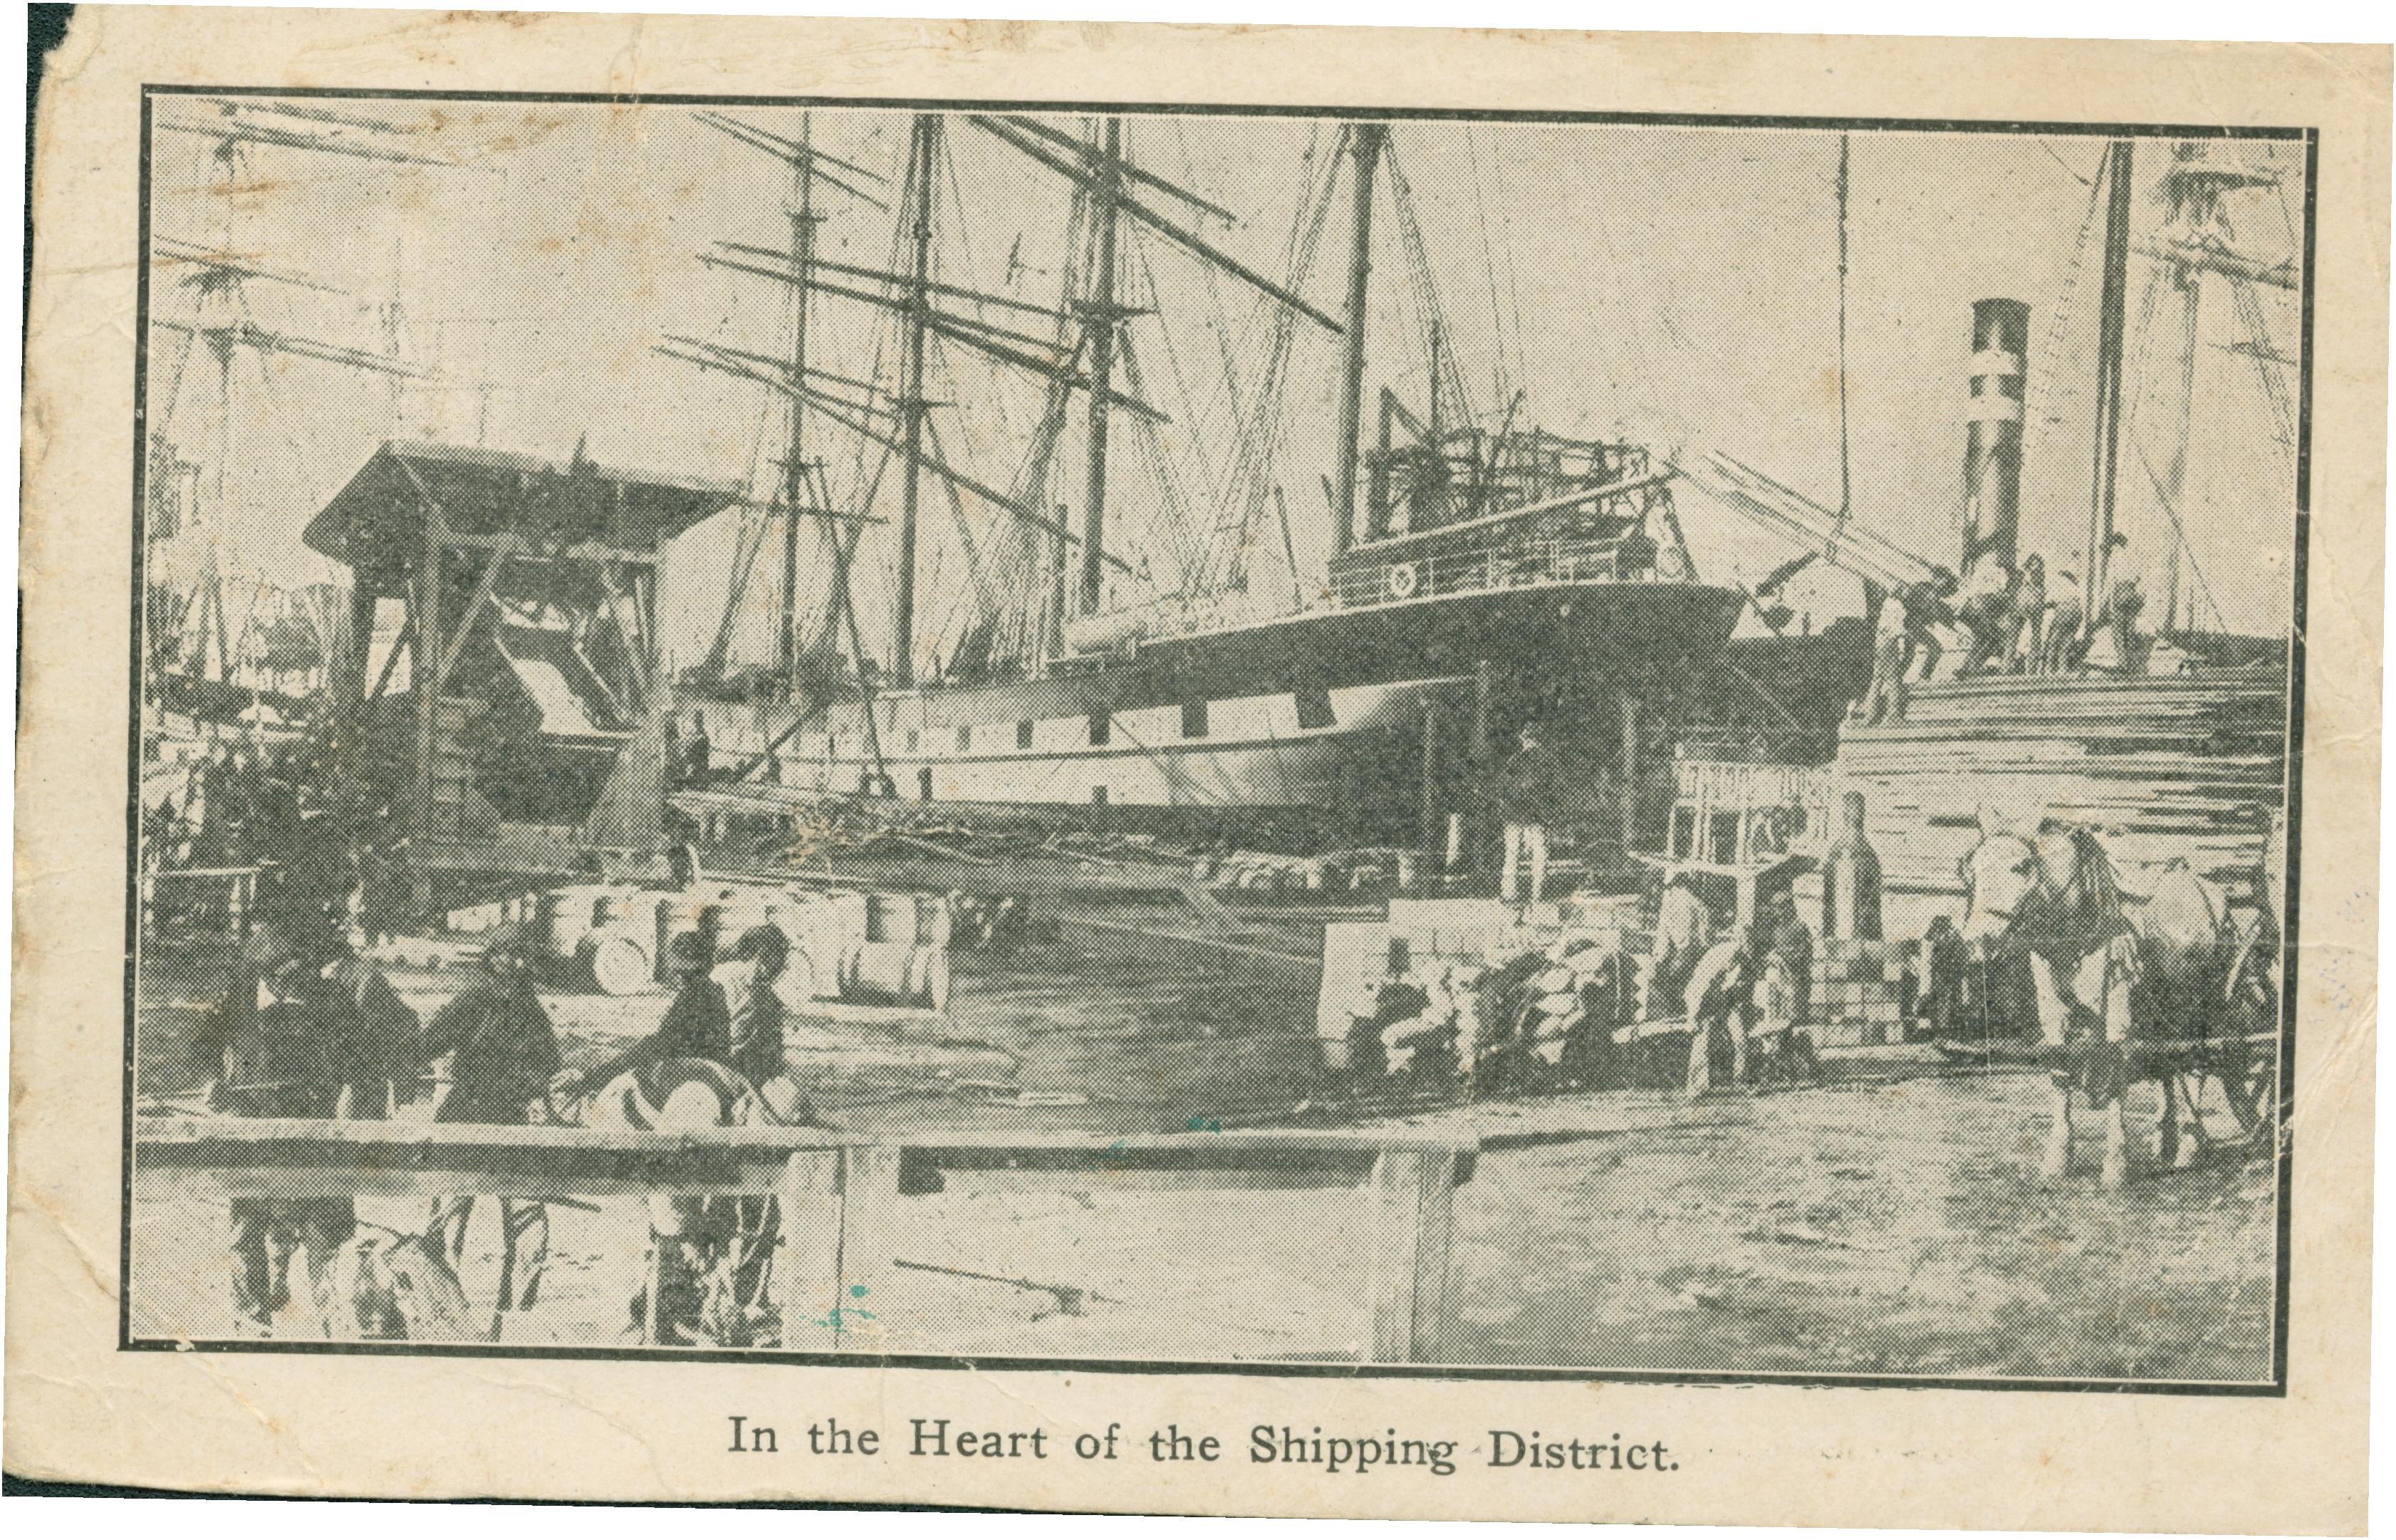 Shows an image of the shipping district in San Francisco.